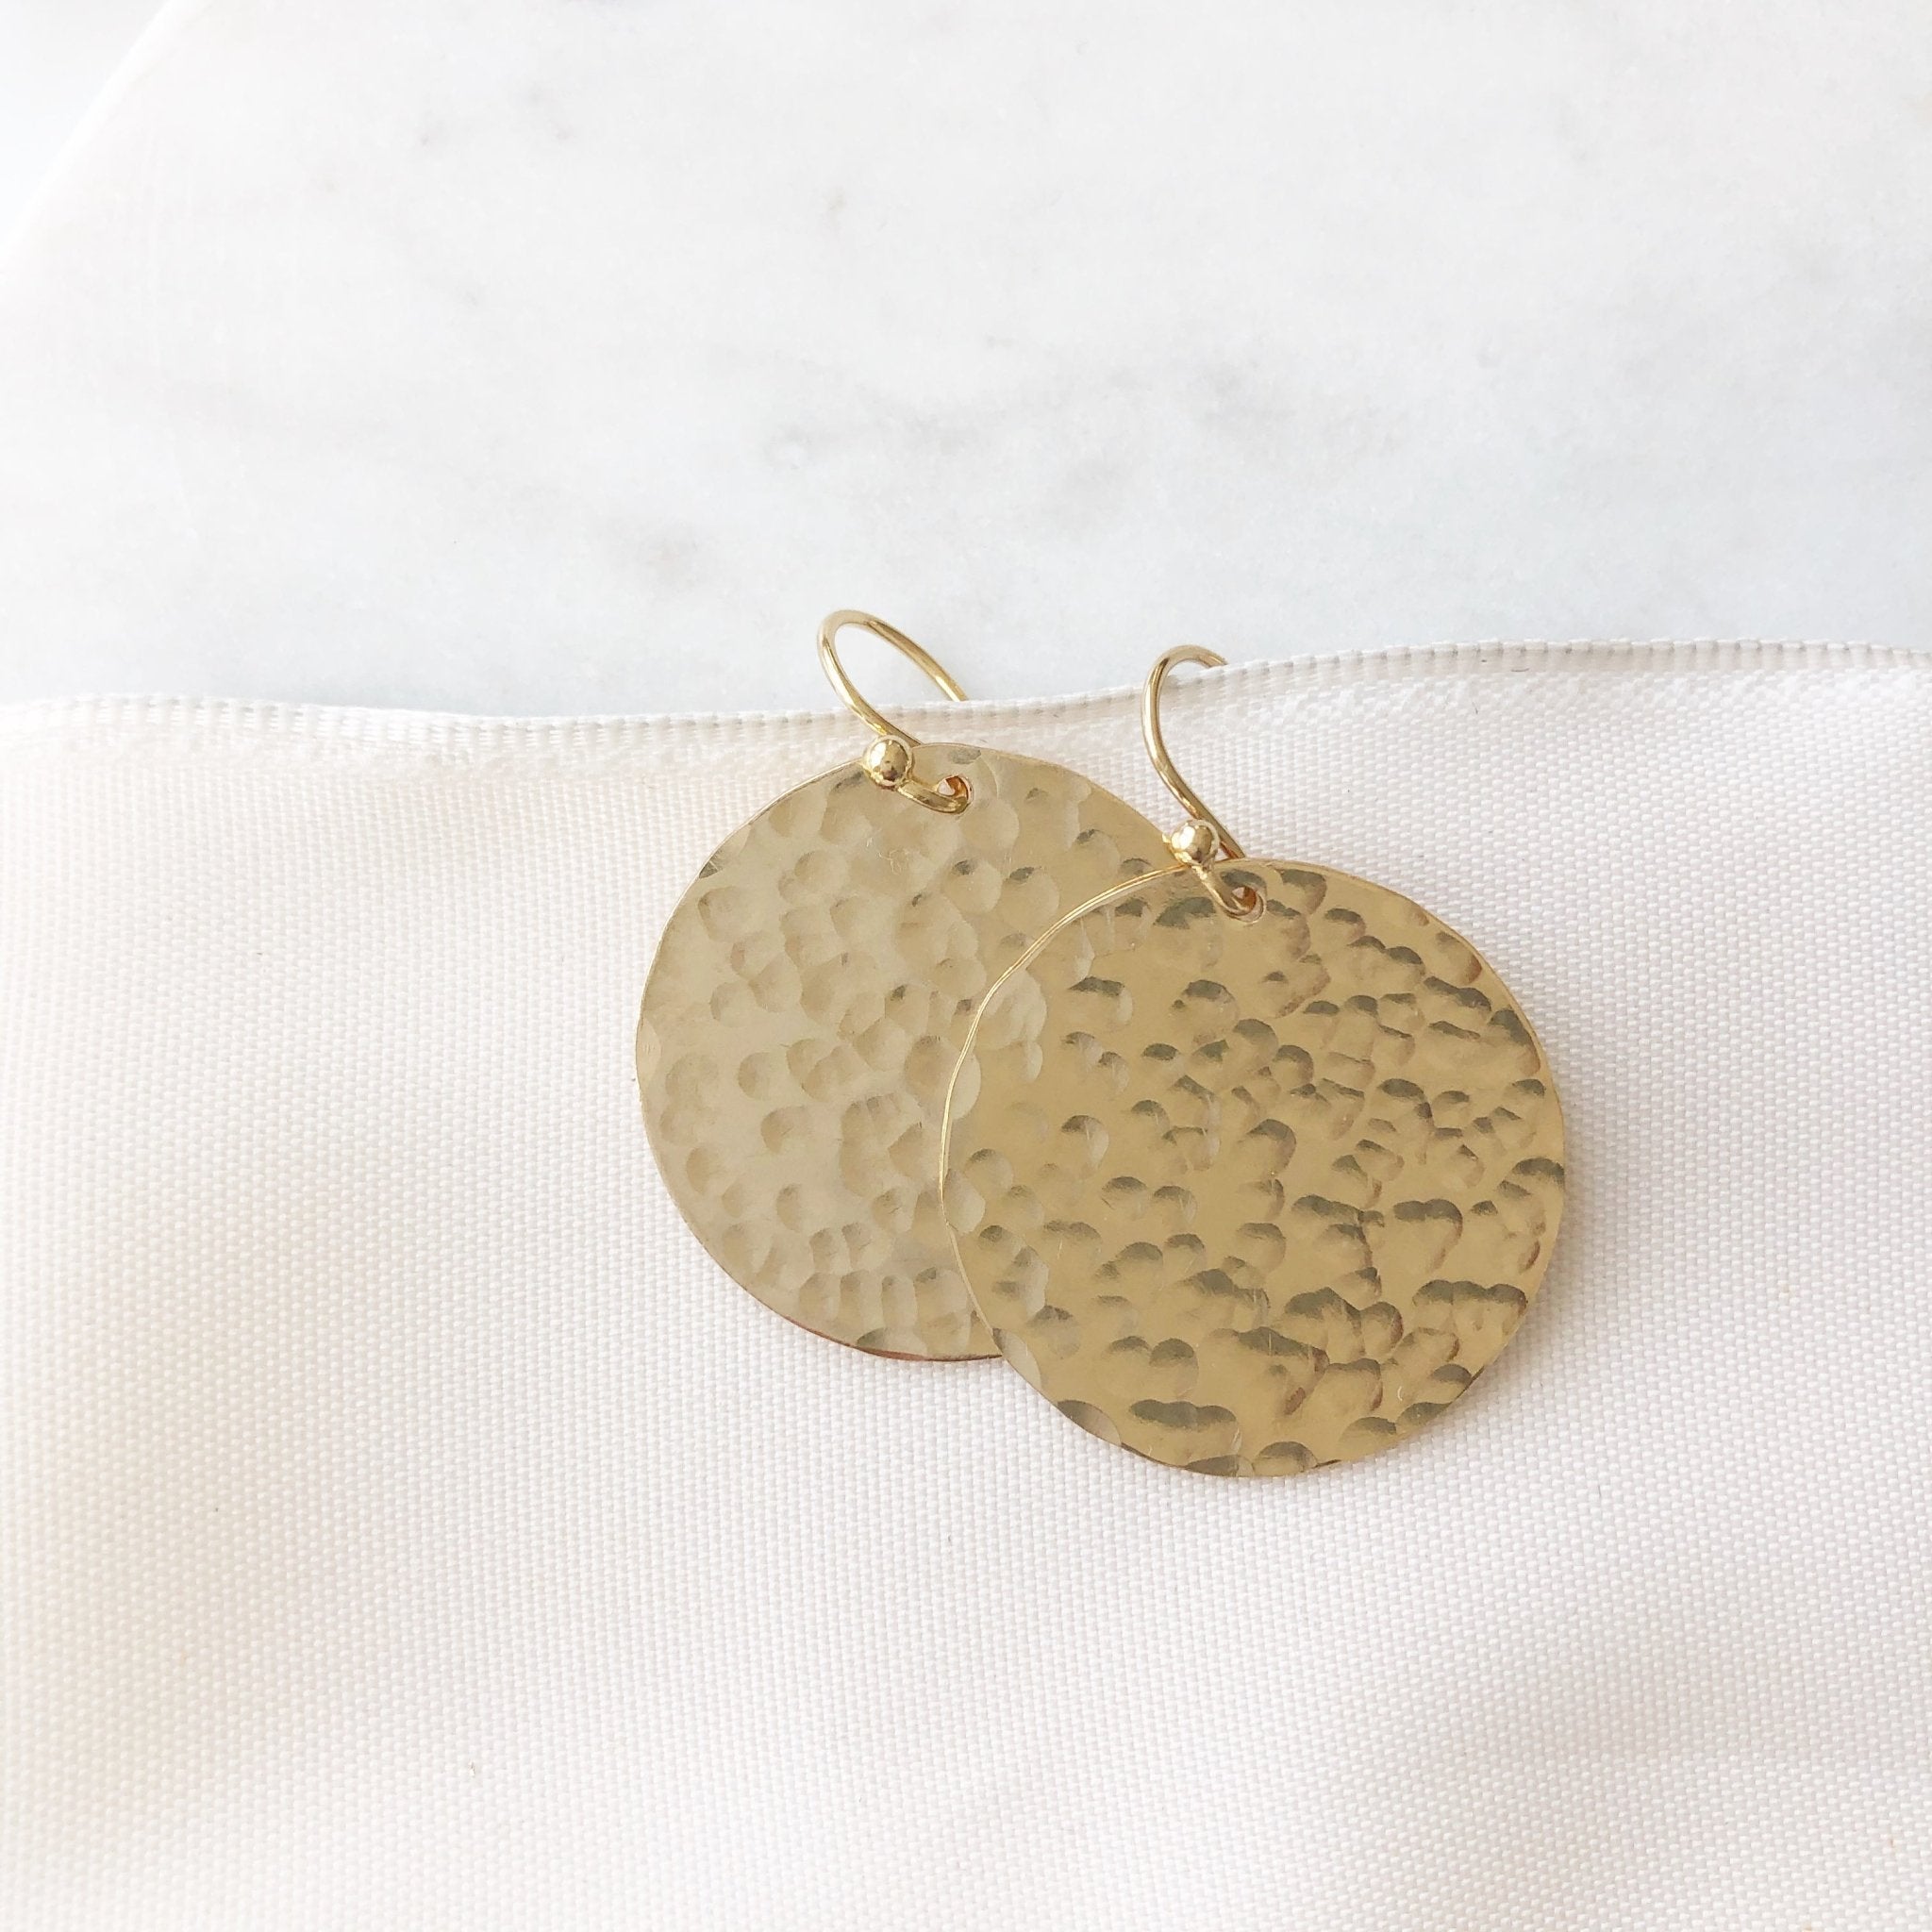 Hammered Rolled Gold Disc Earrings By Hazey Designs | notonthehighstreet.com